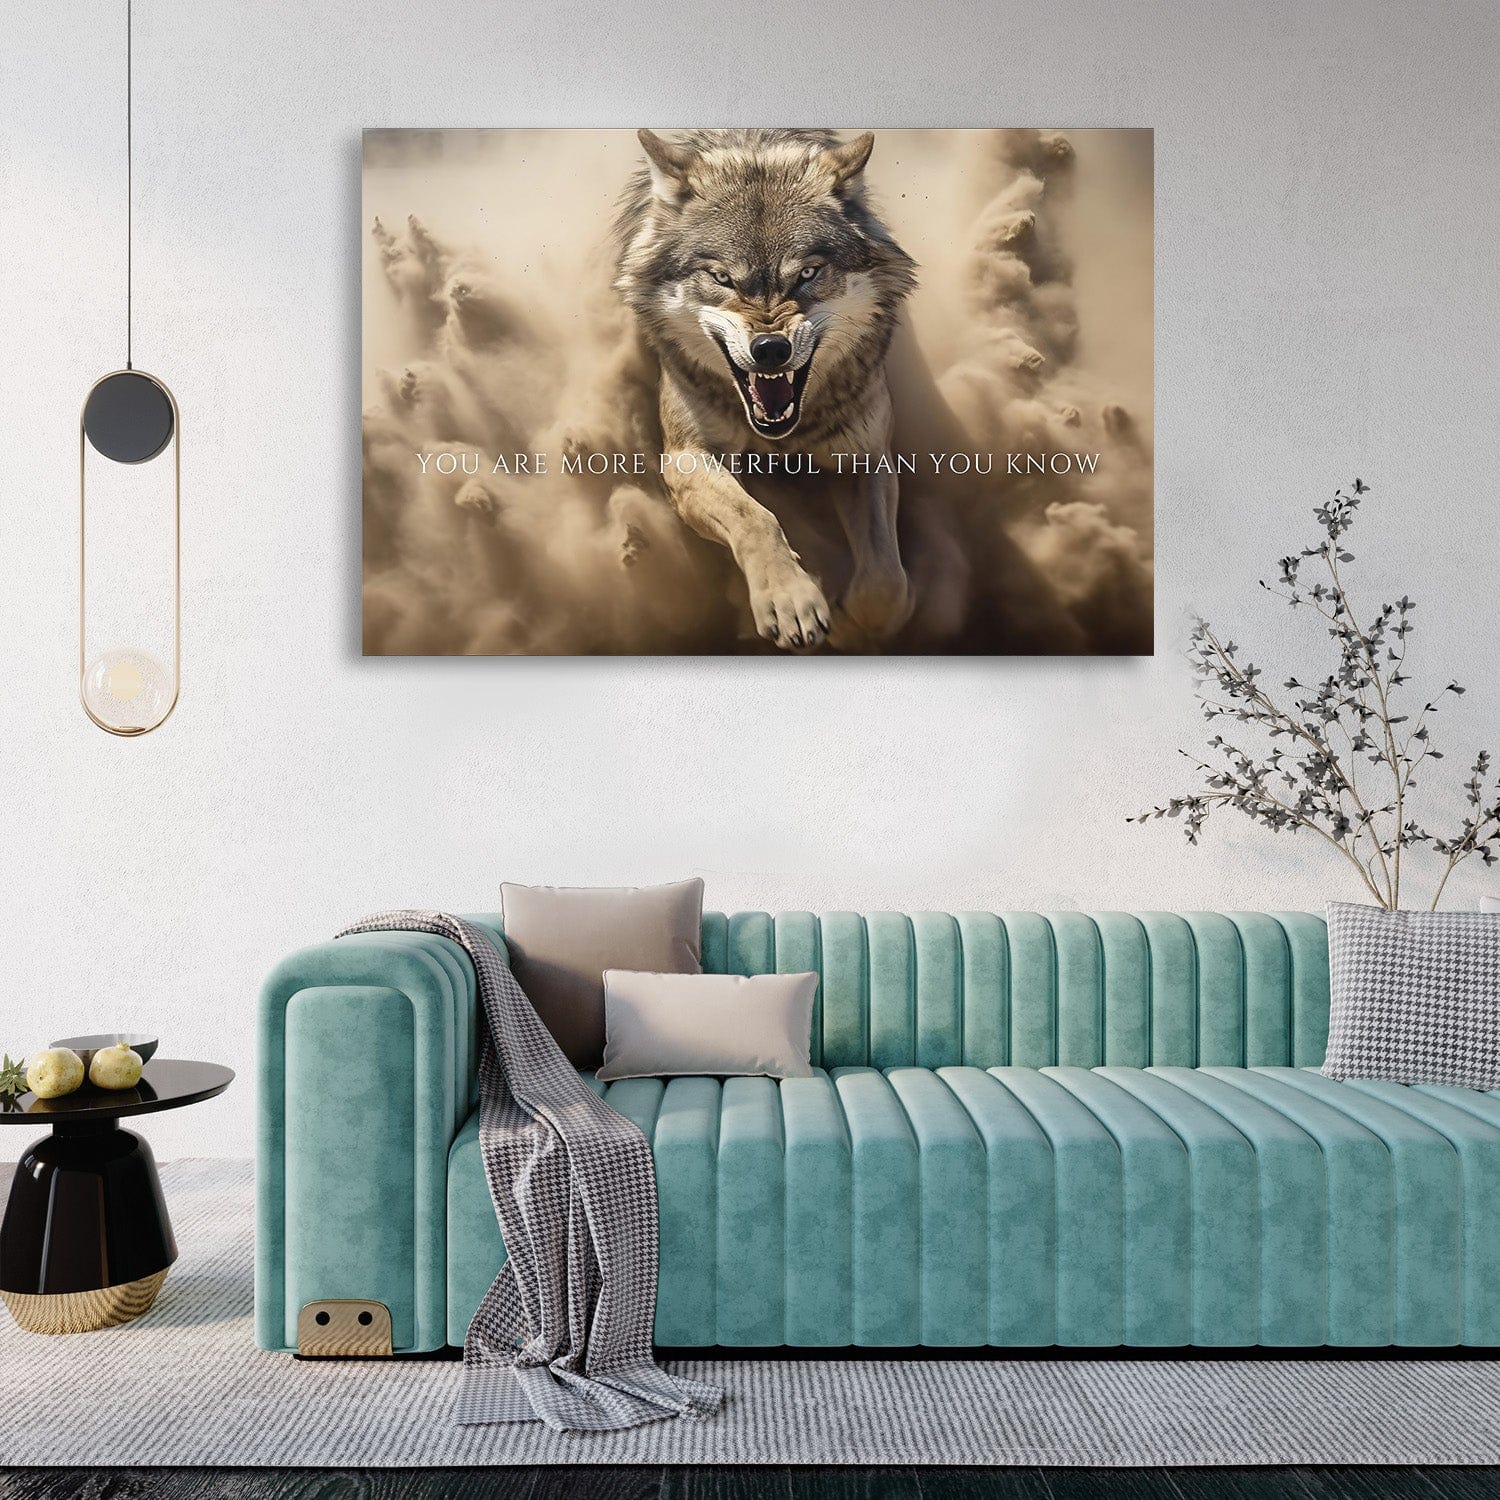 Wolf You are more powerful than you know Wall Art Inspirational Wall  Art Motivational Wall Art Quotes Office Art ImpaktMaker Exclusive